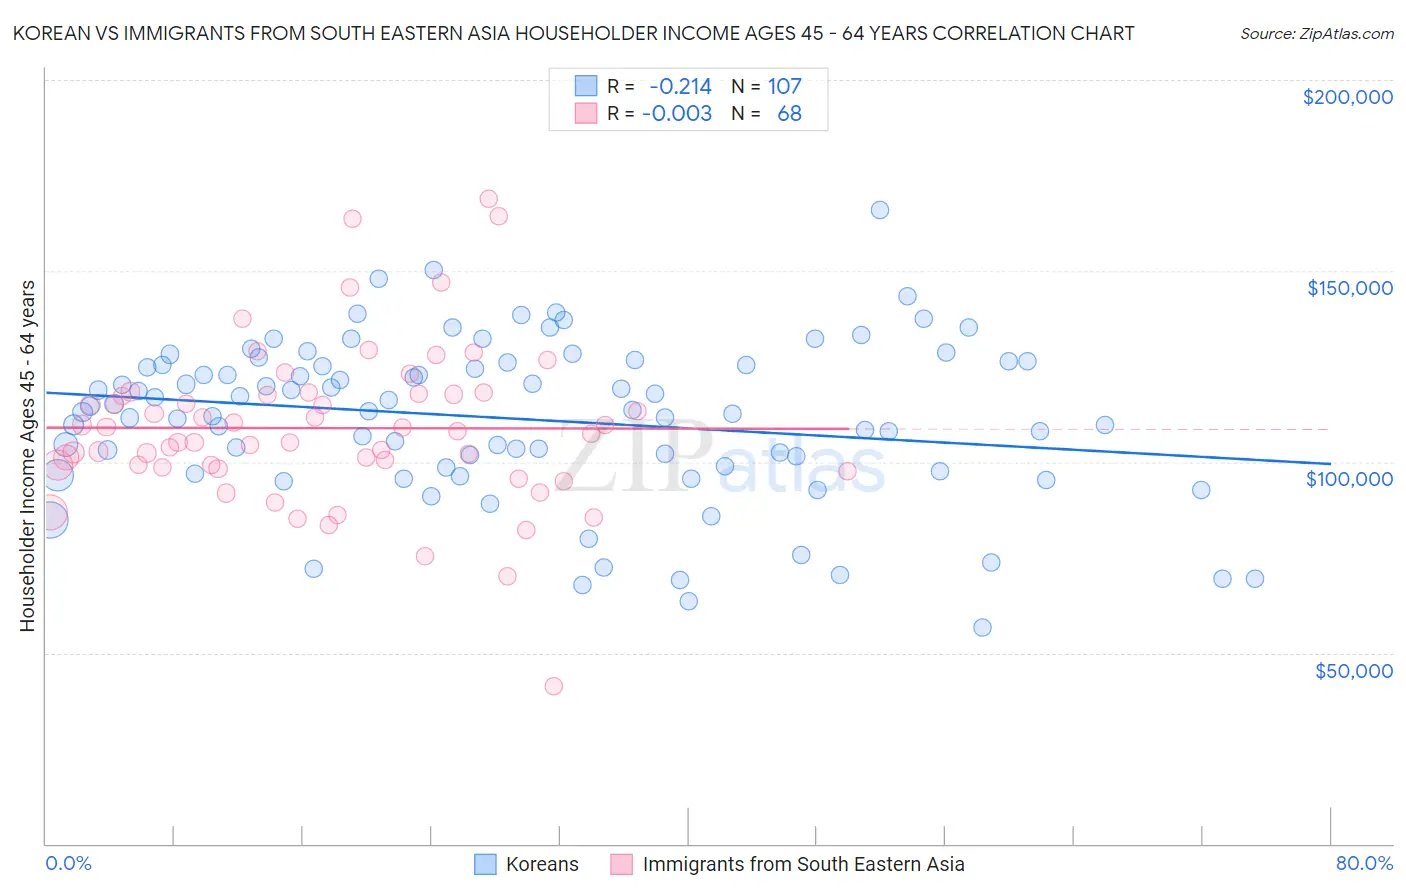 Korean vs Immigrants from South Eastern Asia Householder Income Ages 45 - 64 years